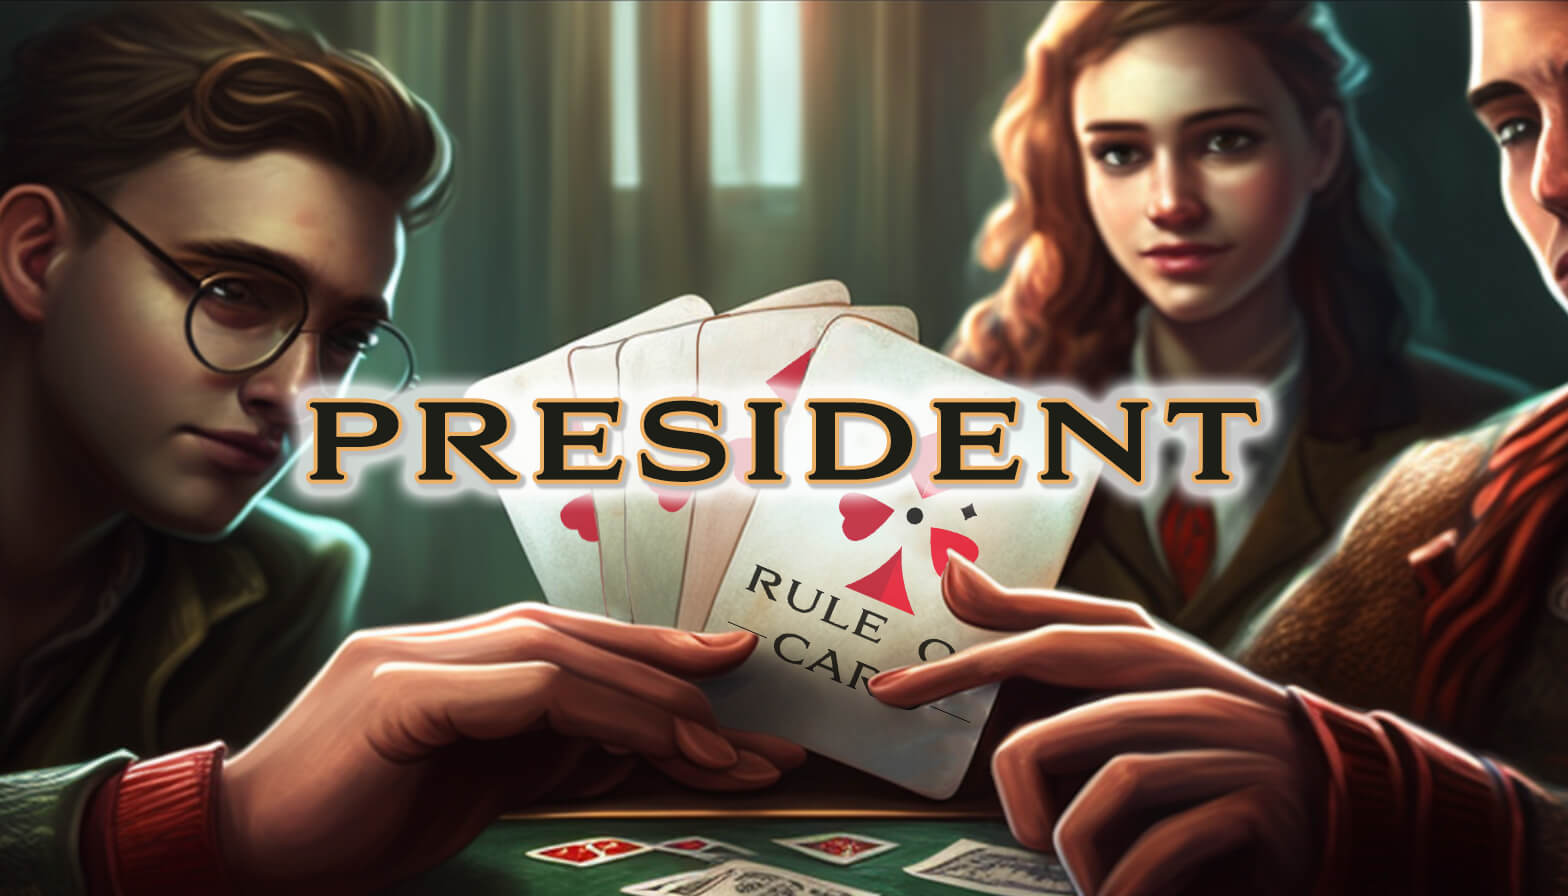 Playing the card game President